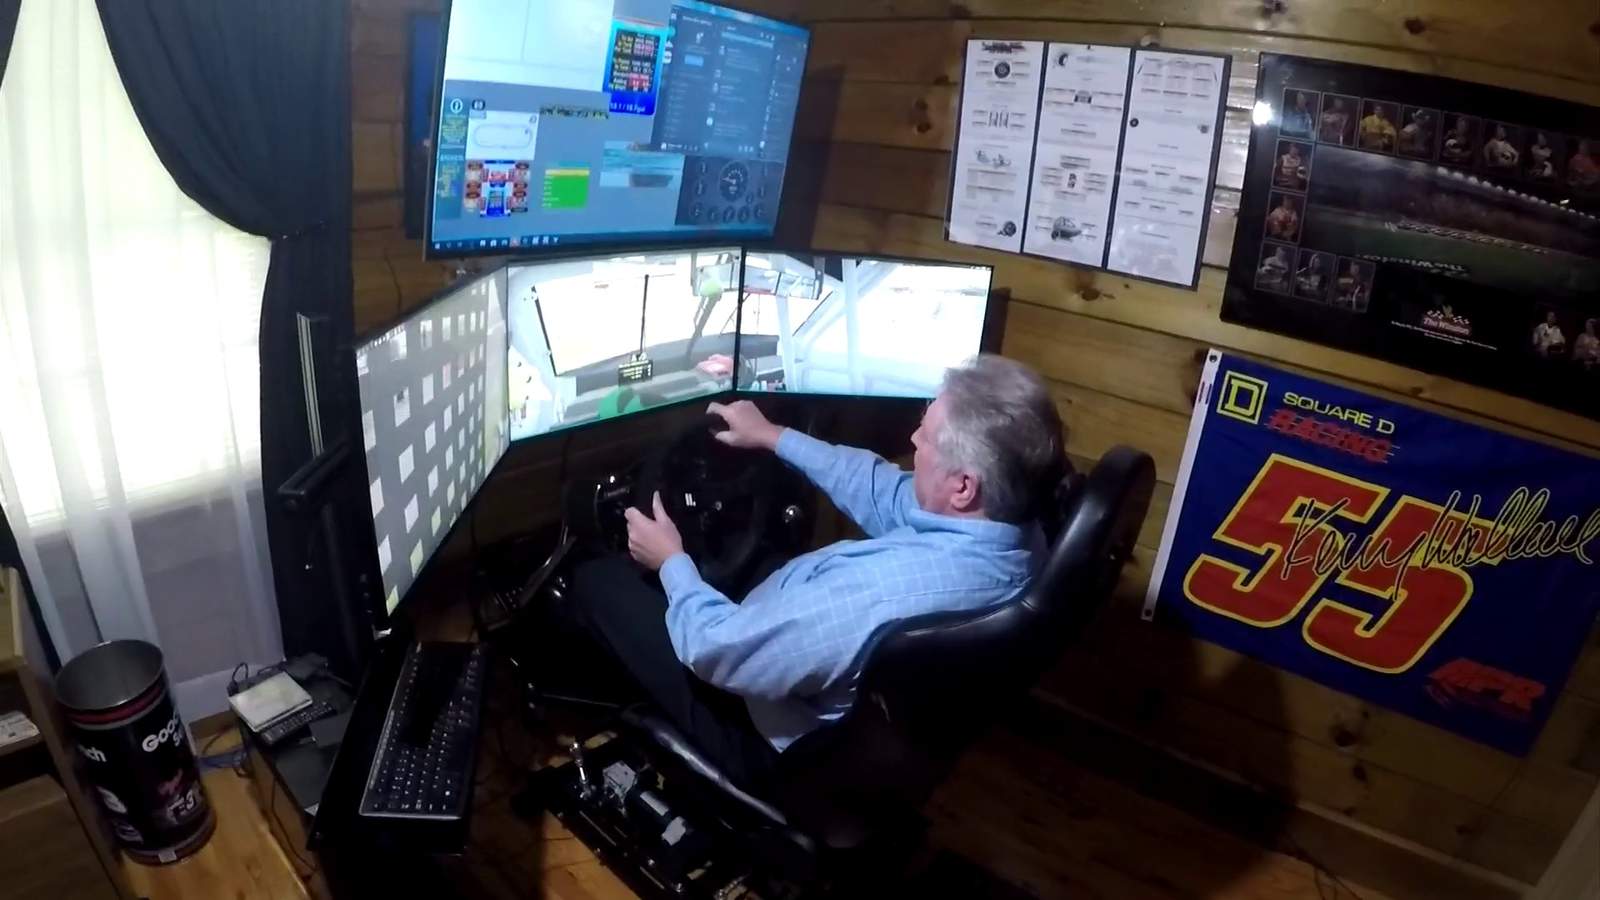 The Need for Speed: local man relives glory days through iRacing